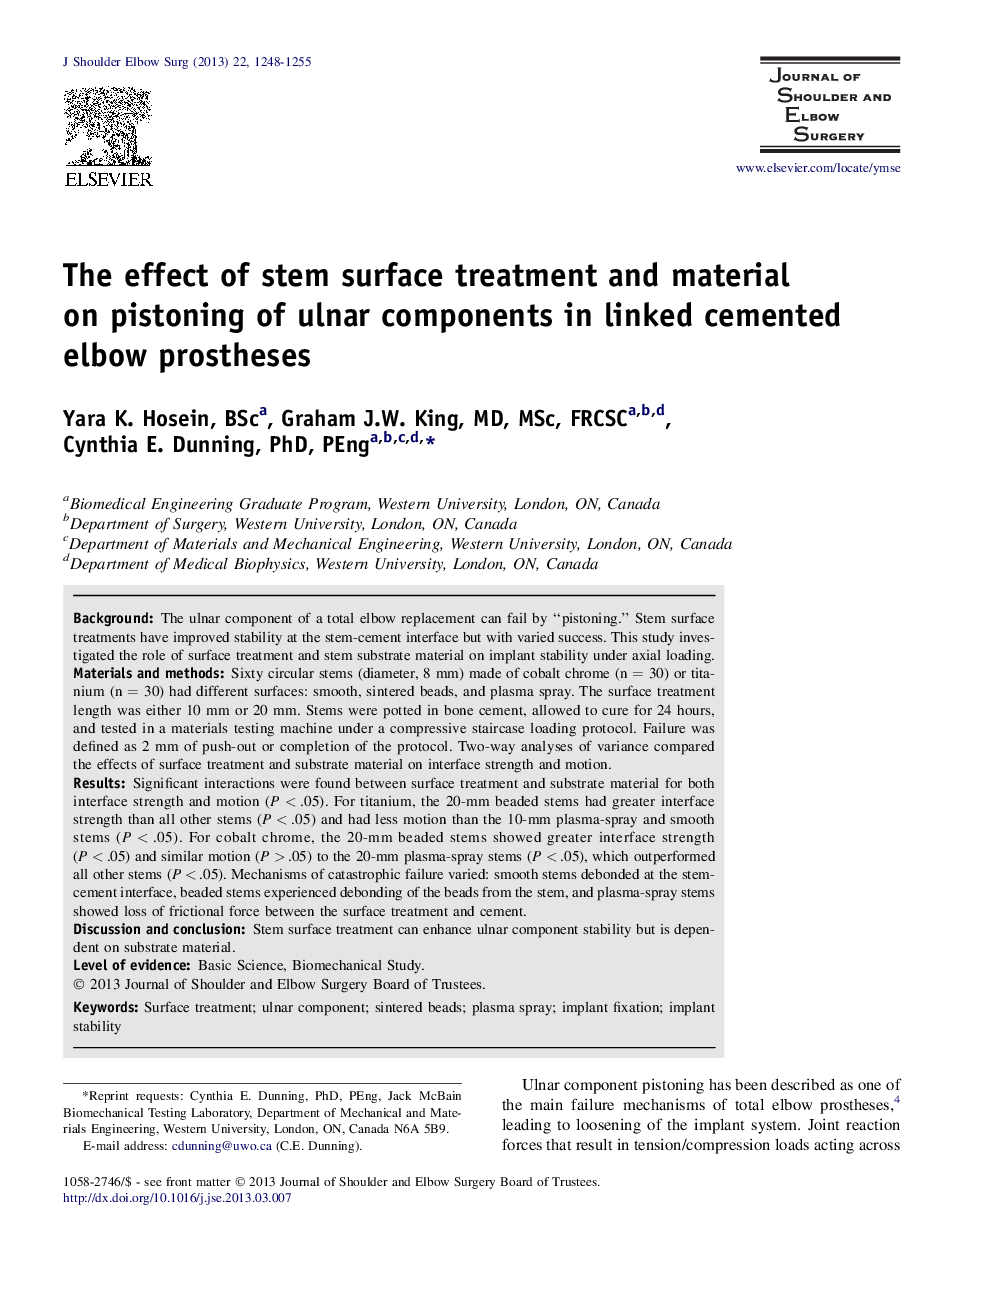 The effect of stem surface treatment and material onÂ pistoning of ulnar components in linked cemented elbow prostheses